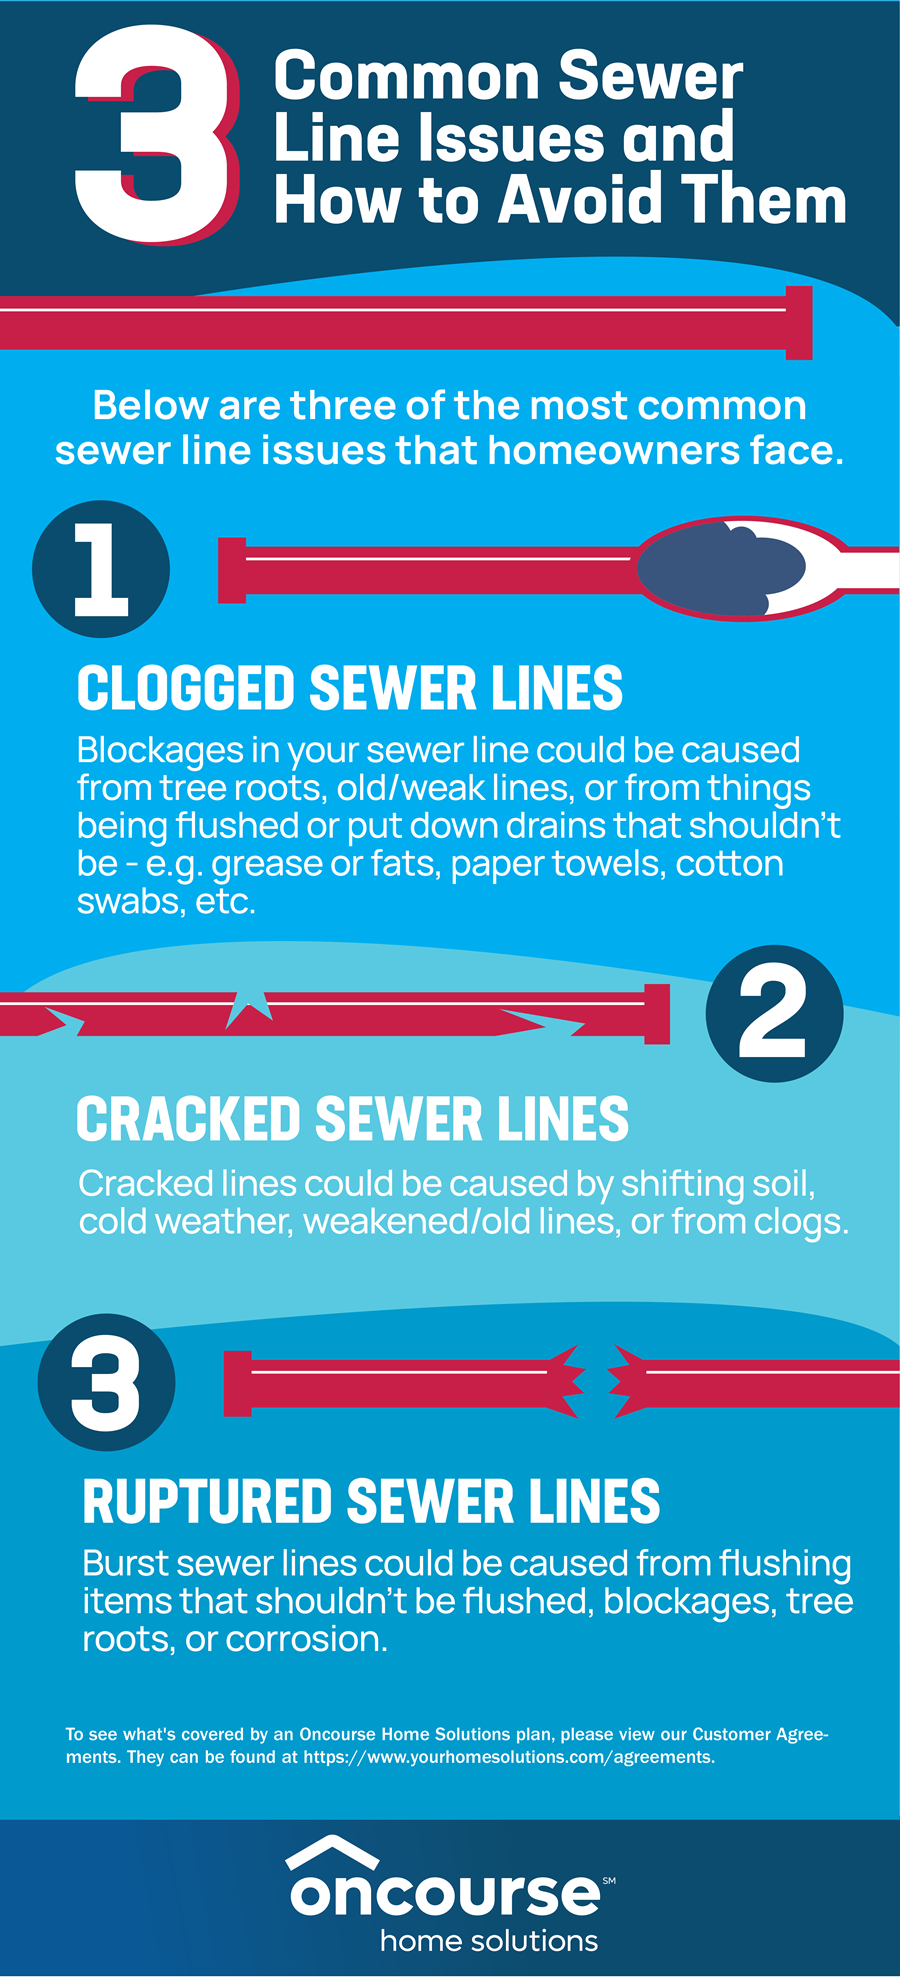 Common Sewer Line Issues and How to Avoid Them